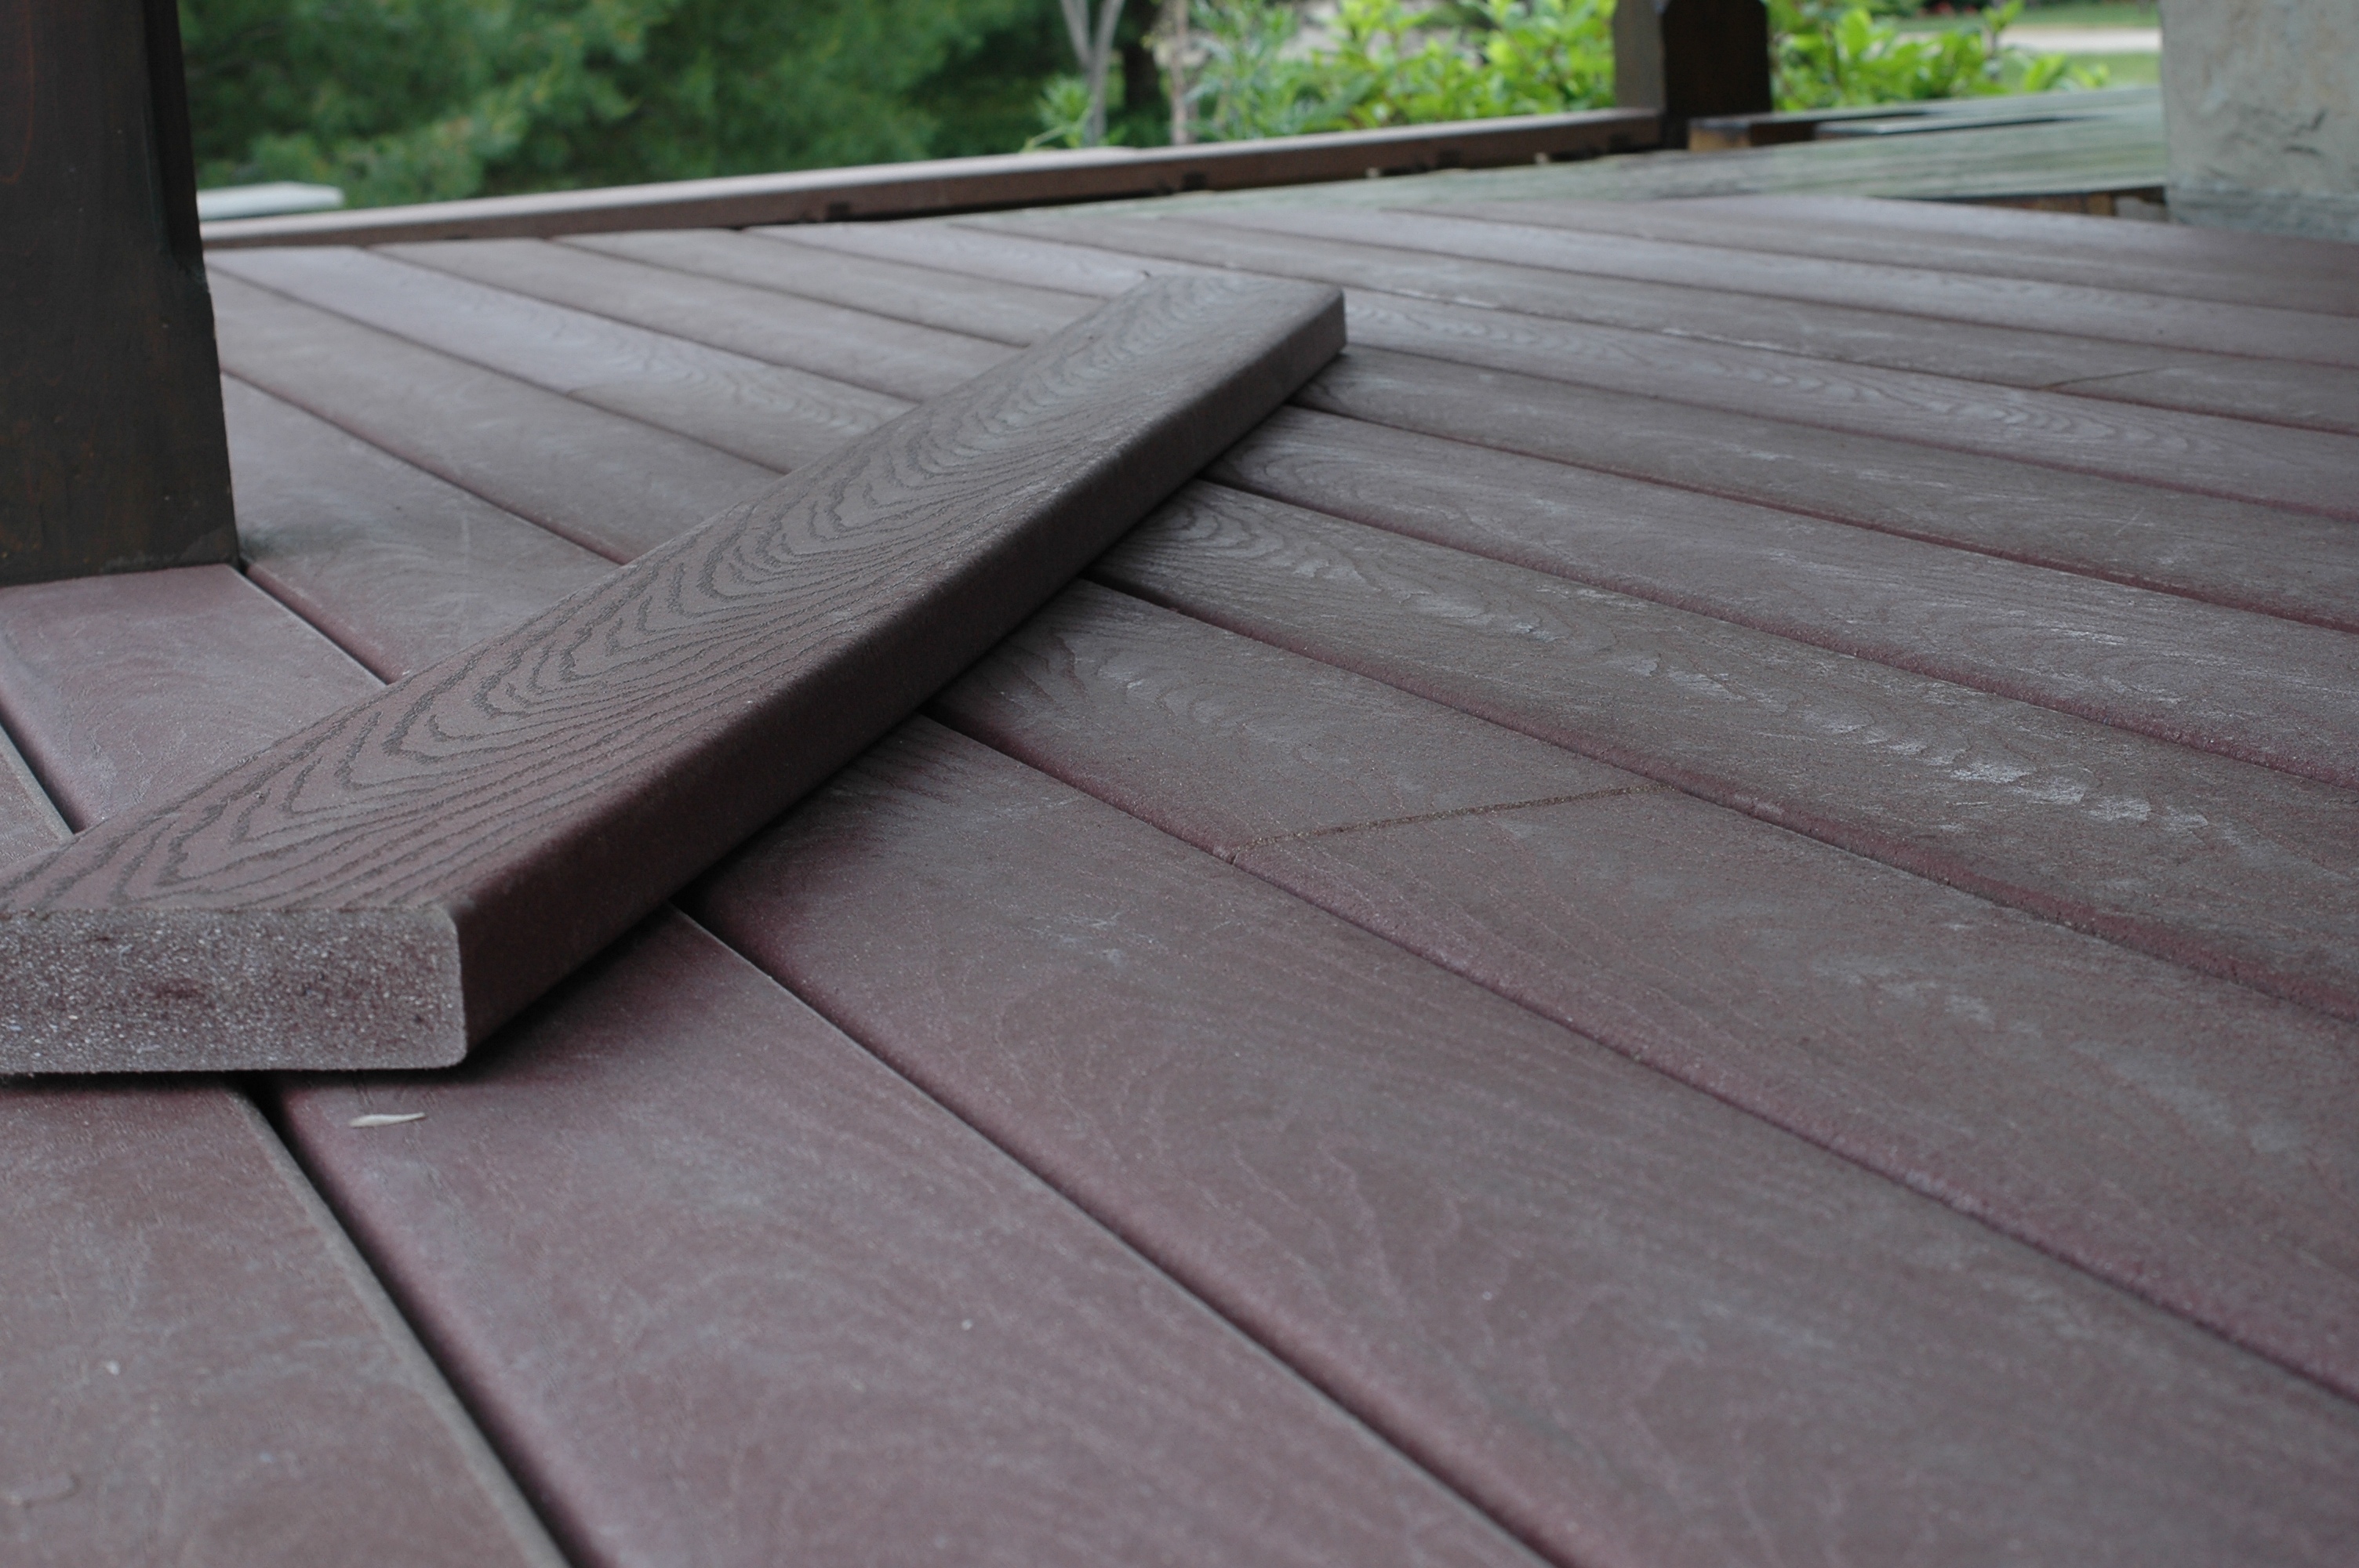 Black Wood Stain is Even More Popular than Ever - Protek Wood Stain